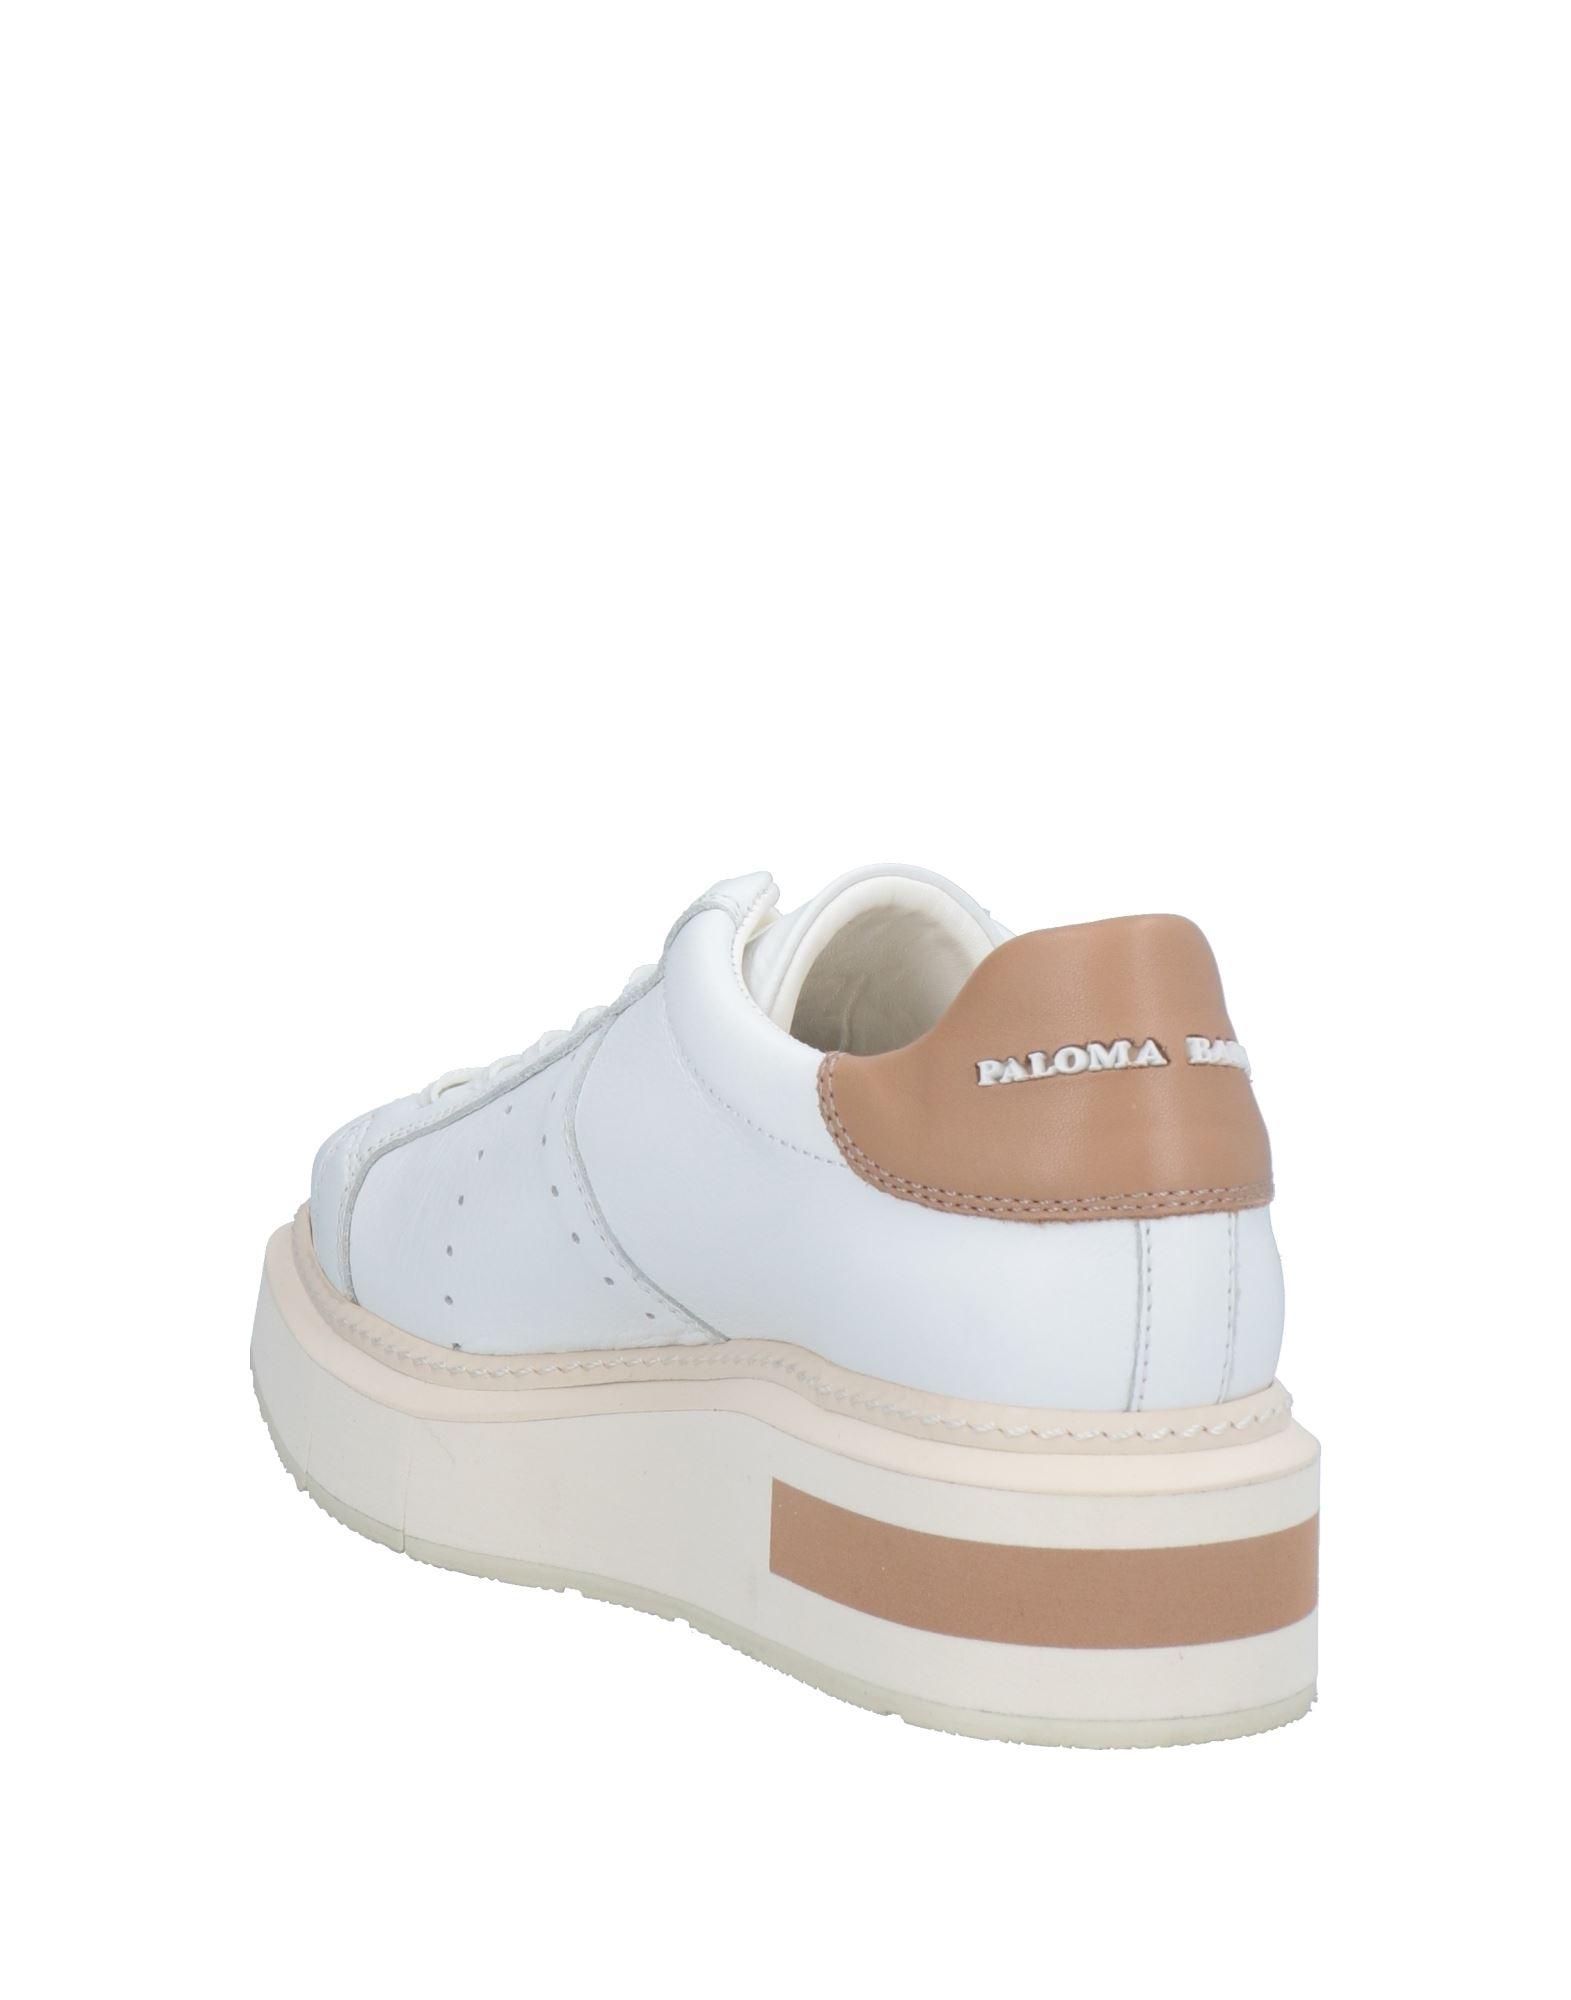 Paloma Barceló Sneakers in White | Lyst